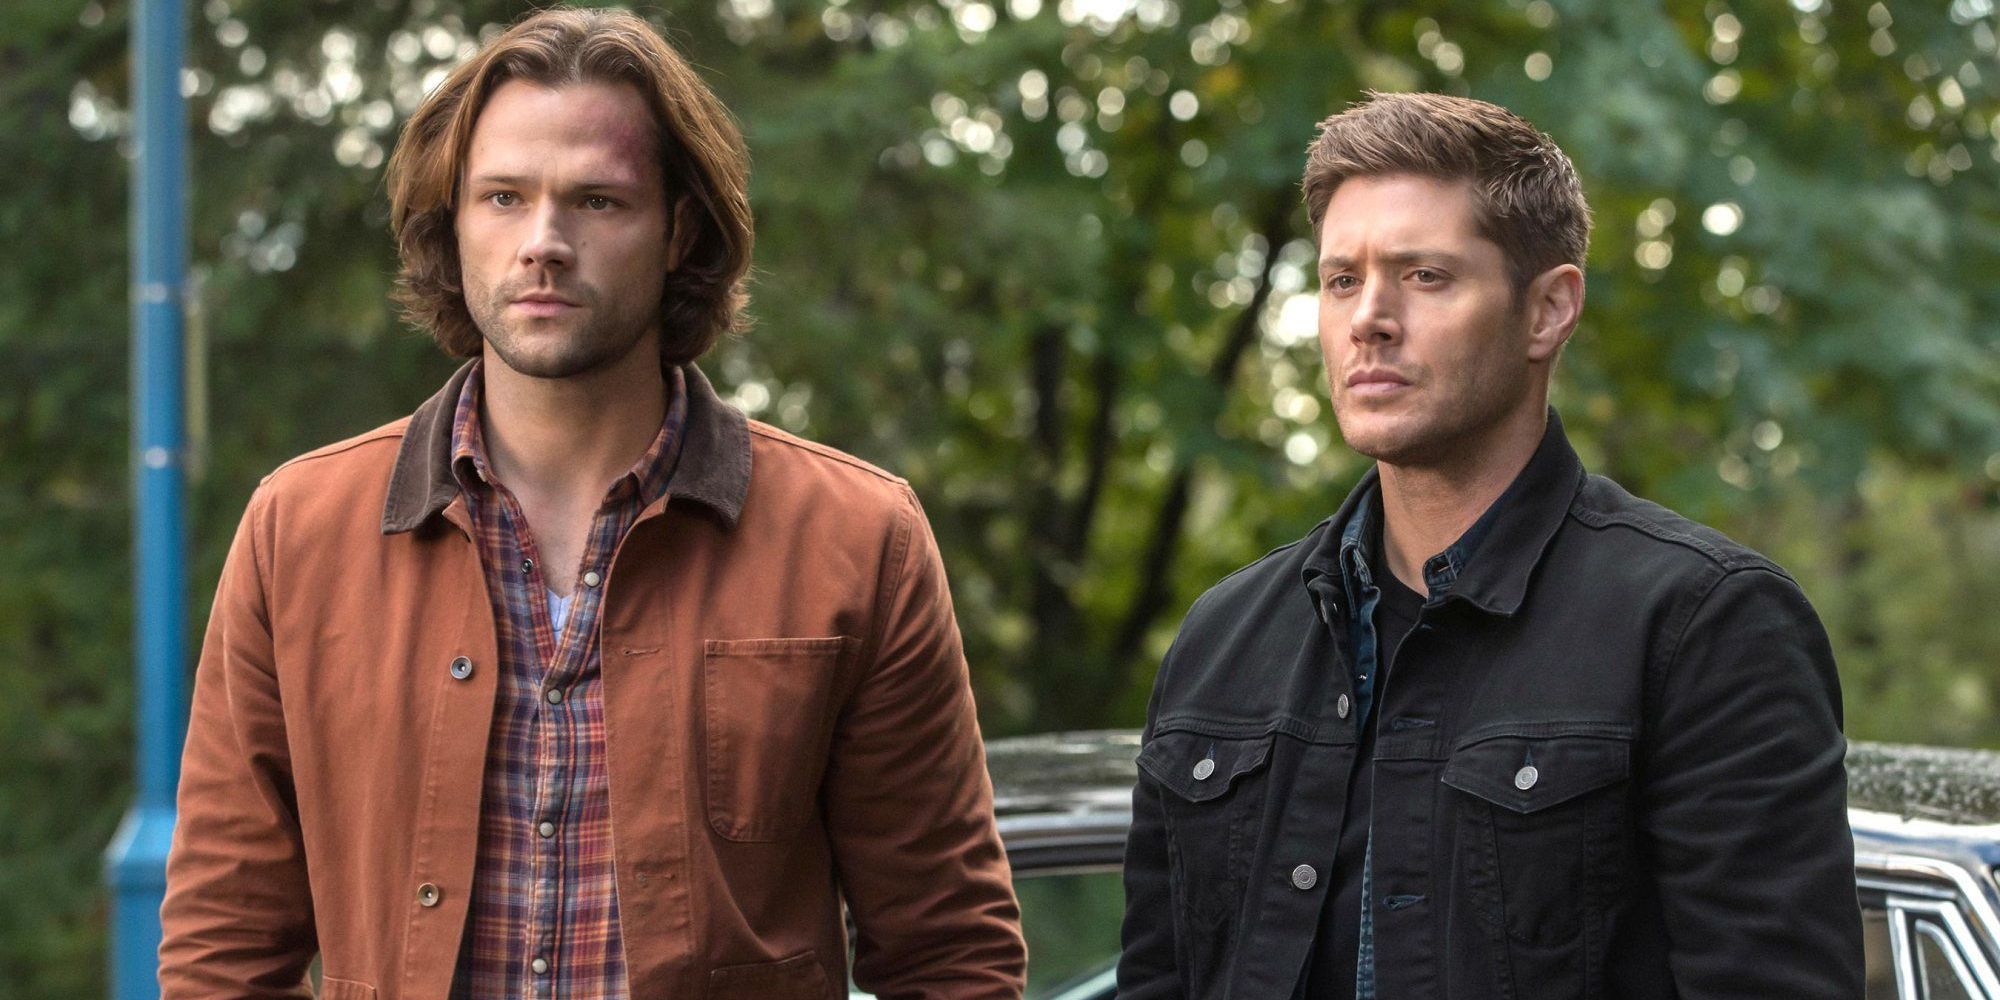 Jared Padalecki and Jensen Ackles as Sam and Dean Winchester looking to the distance in Supernatural